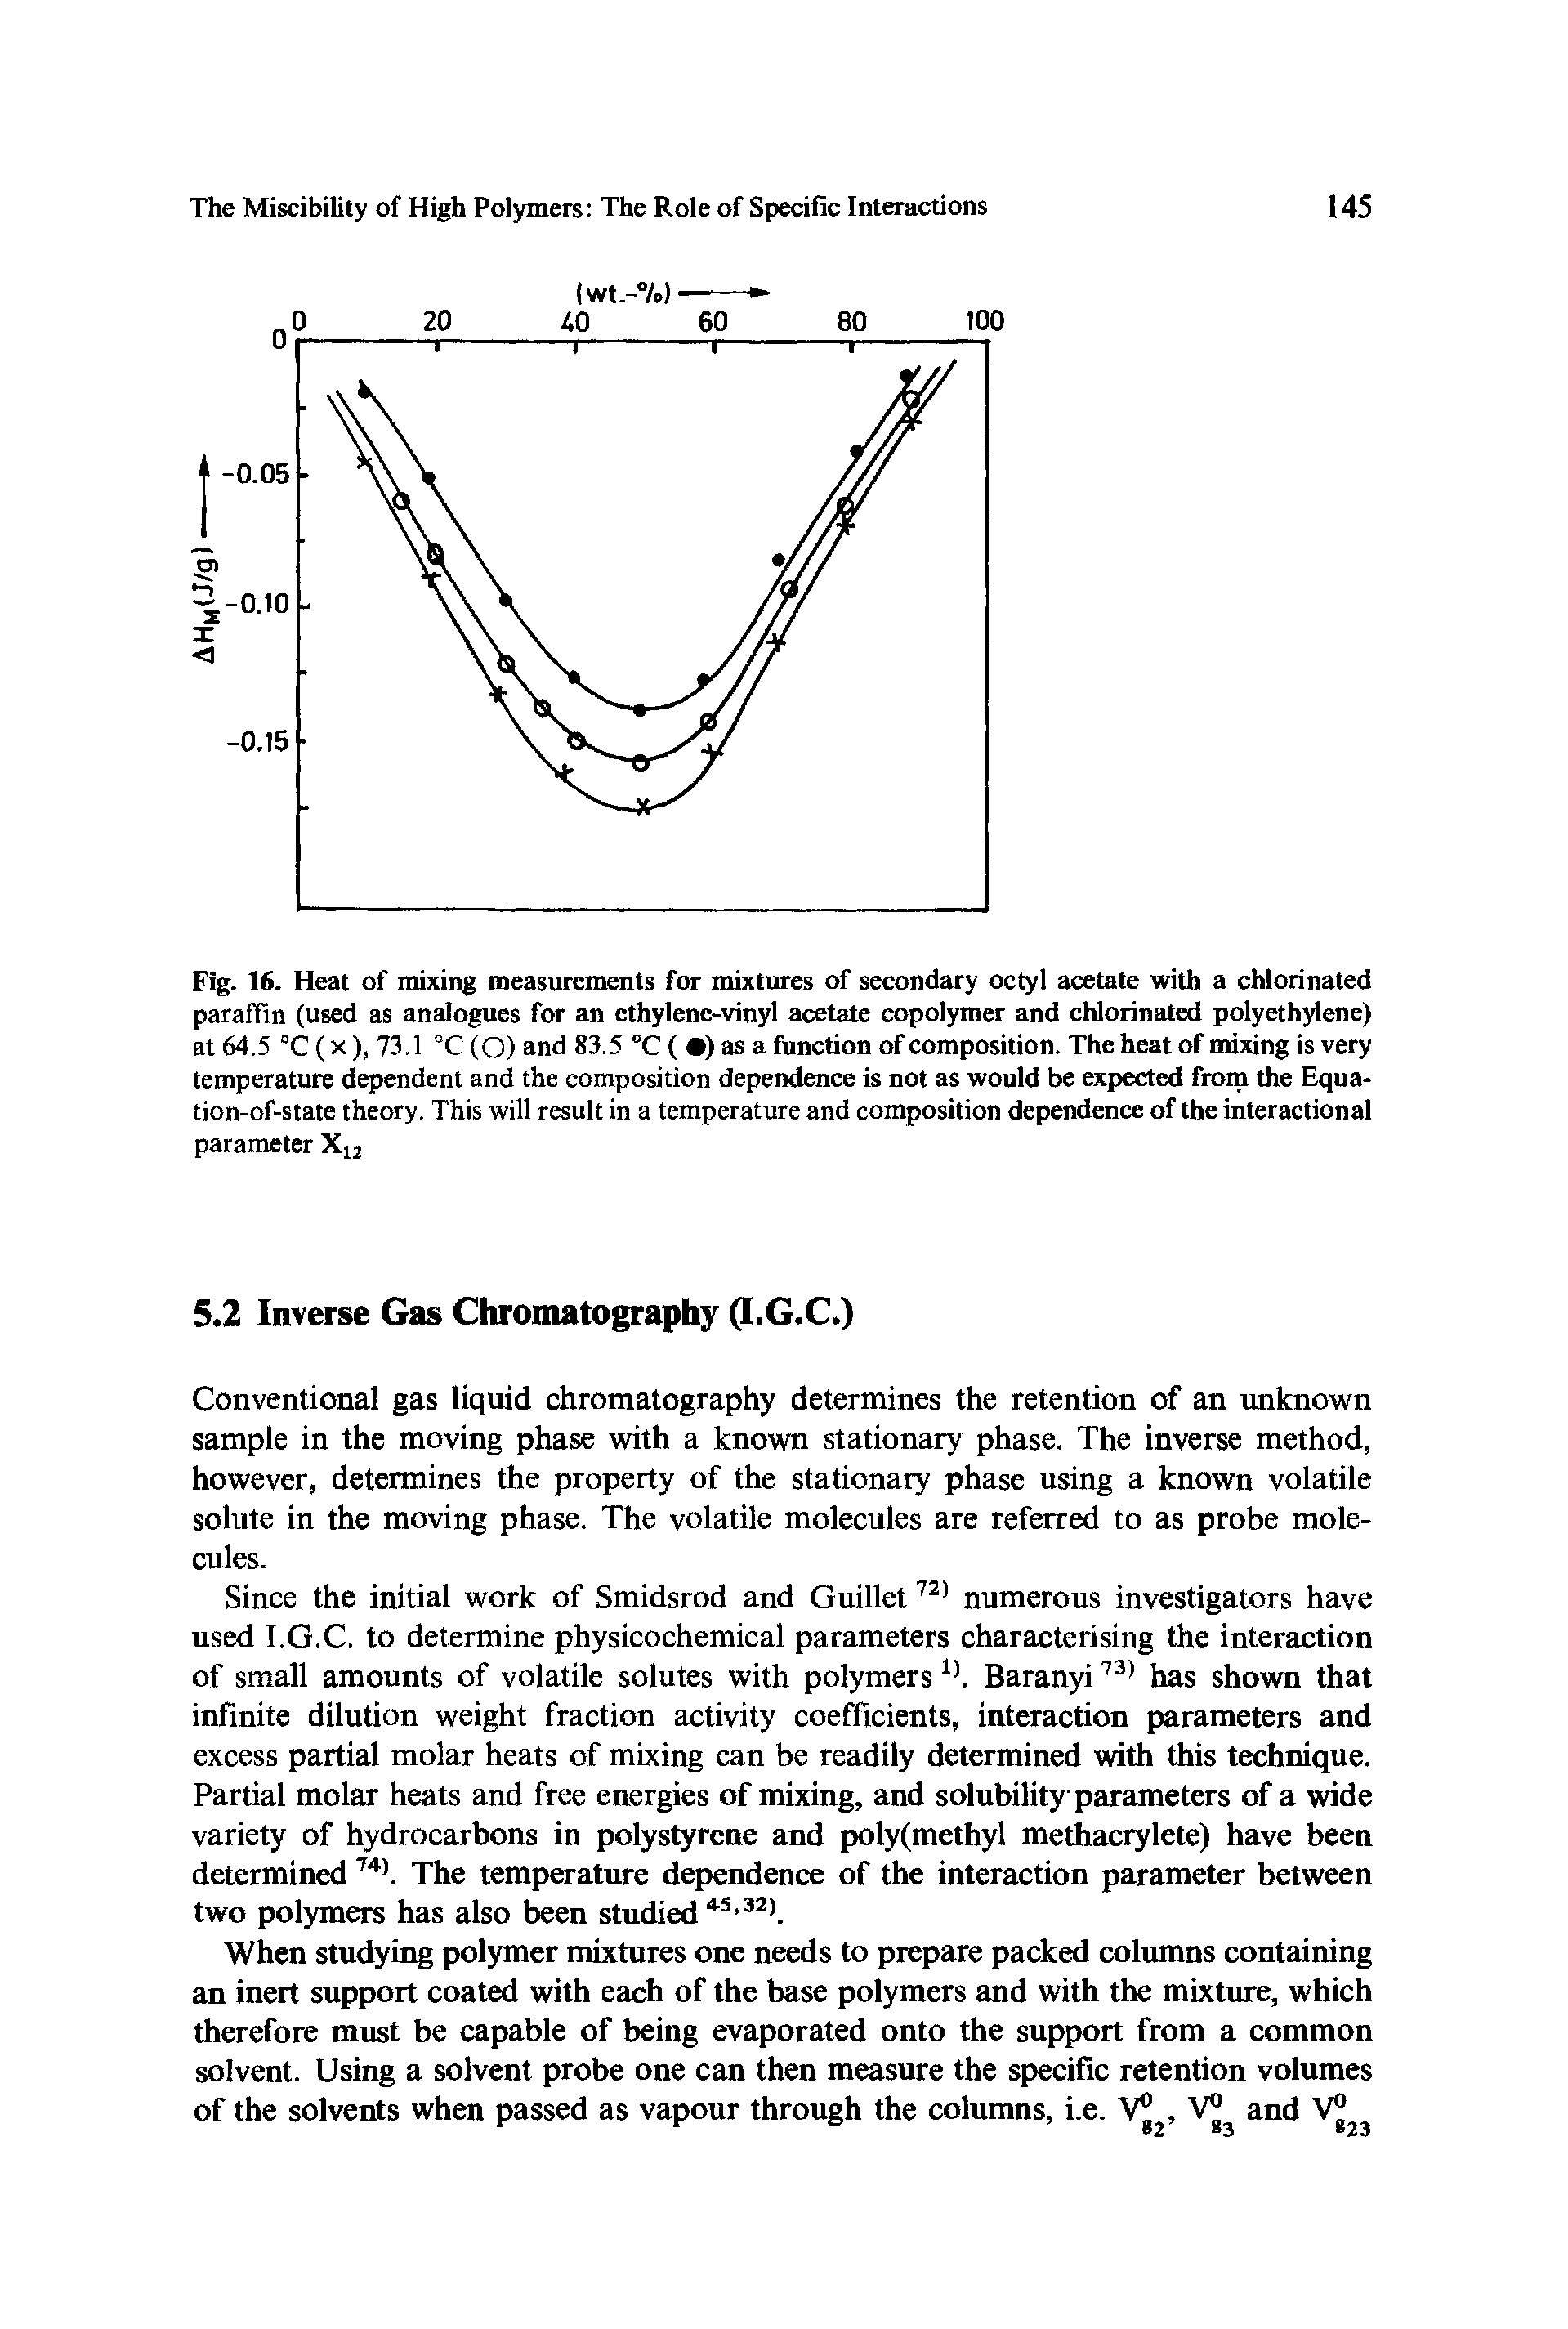 Fig. 16. Heat of mixing measurements for mixtures of secondary octyl acetate with a chlorinated paraffin (used as analogues for an ethylene-vinyl acetate copolymer and chlorinated polyethylene) at 64.5 °C (x), 73.1 °C(0) and 83.5 °C ( ) as a function of composition. The heat of mixing is very temperature dependent and the composition dependence is not as would be expected from the Equa-tion-of-state theory. This will result in a temperature and composition dependence of the interactional parameter...